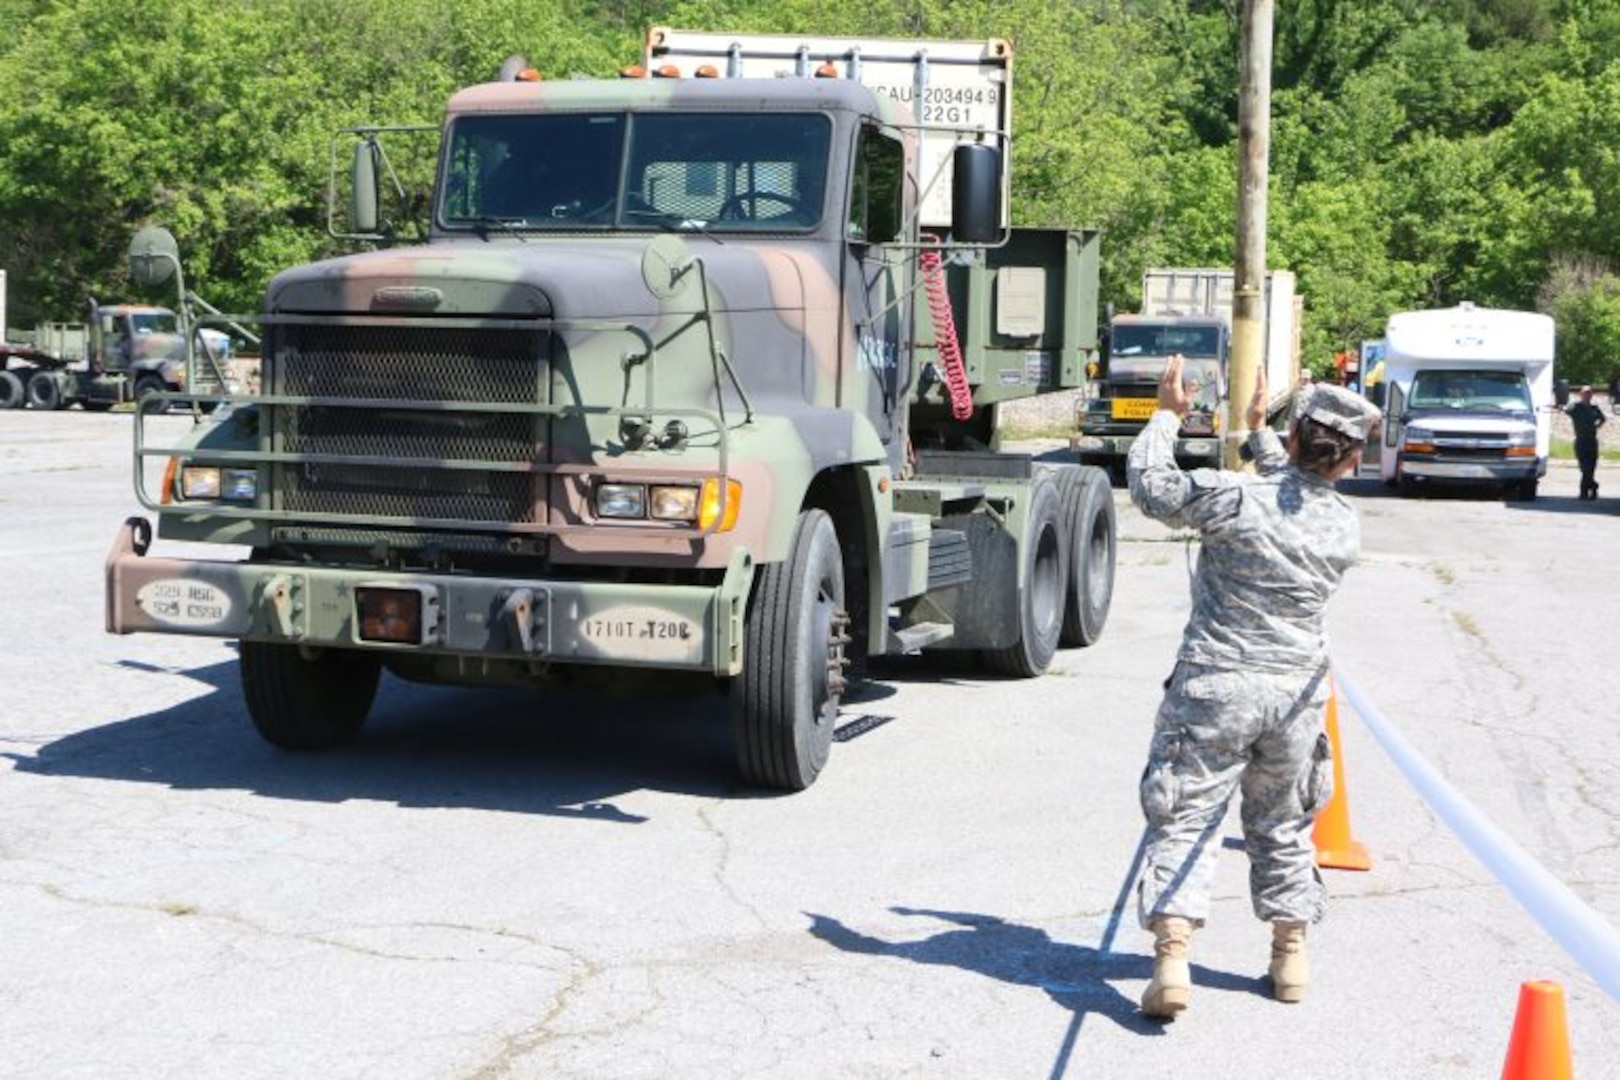 1030th Soldiers operate trailer transfer point in Gate City during annual training